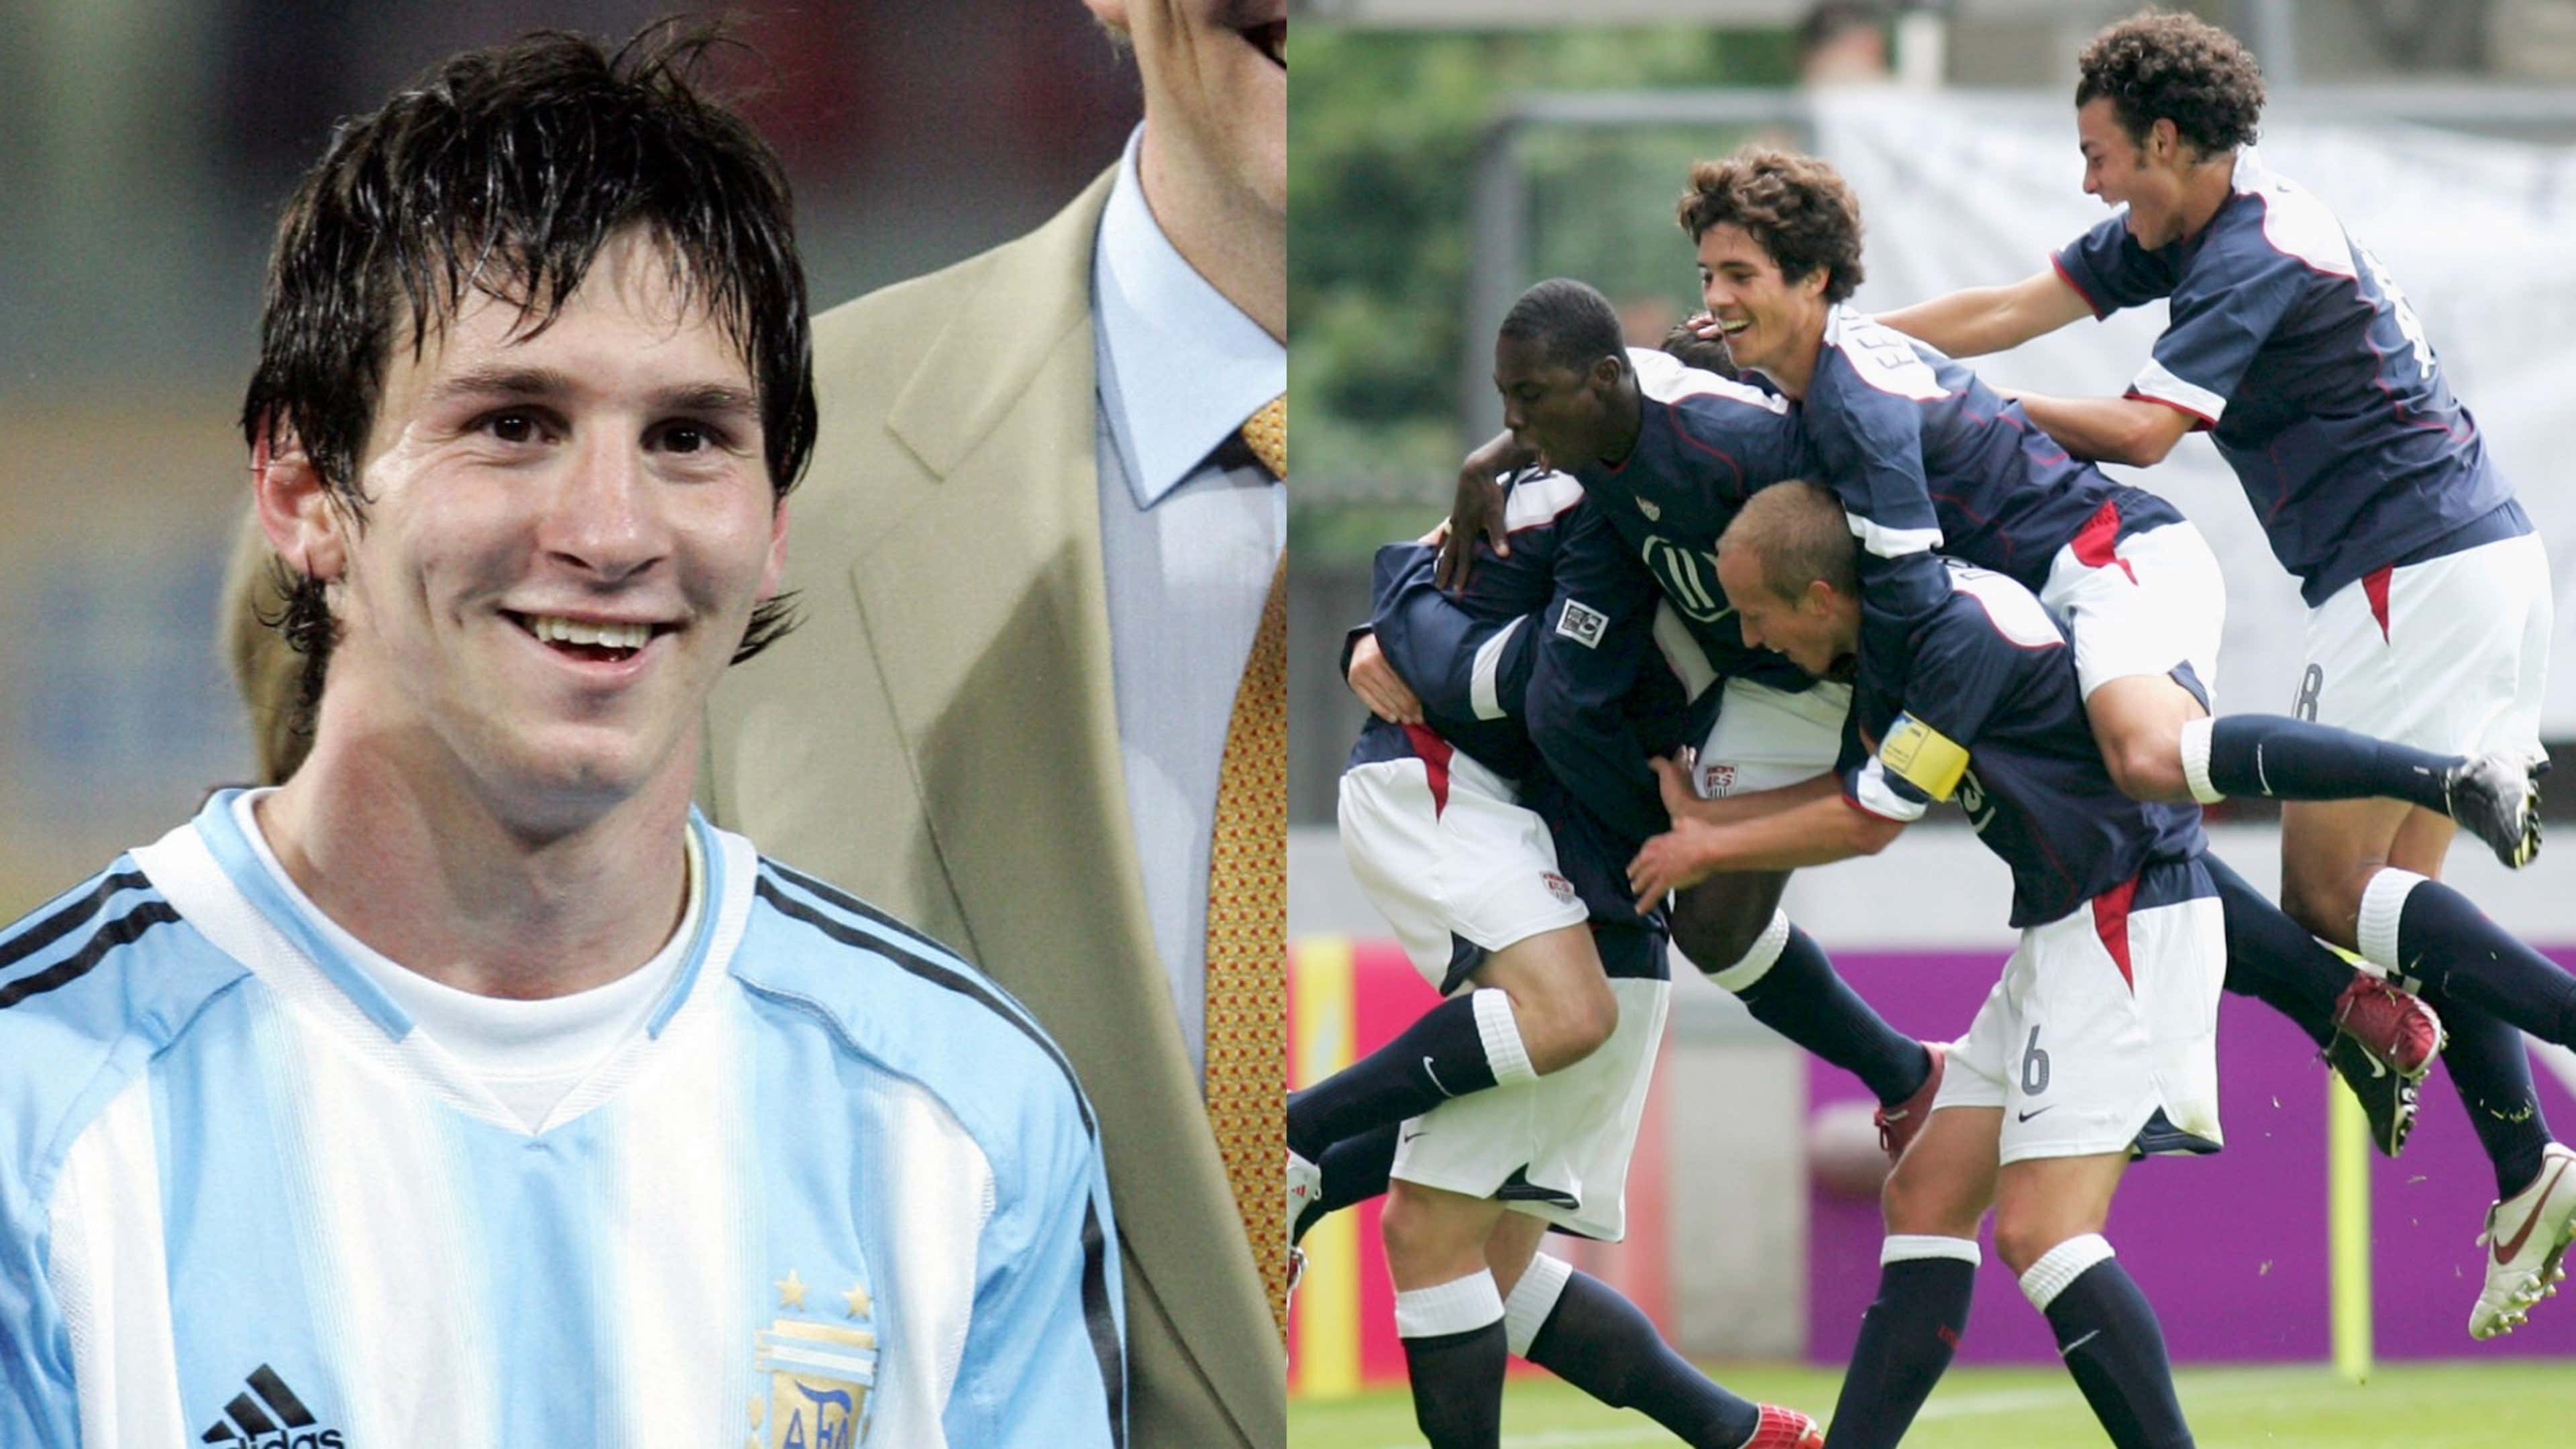 The Day Lionel Messi and Cristiano Ronaldo Shocked The Whole World